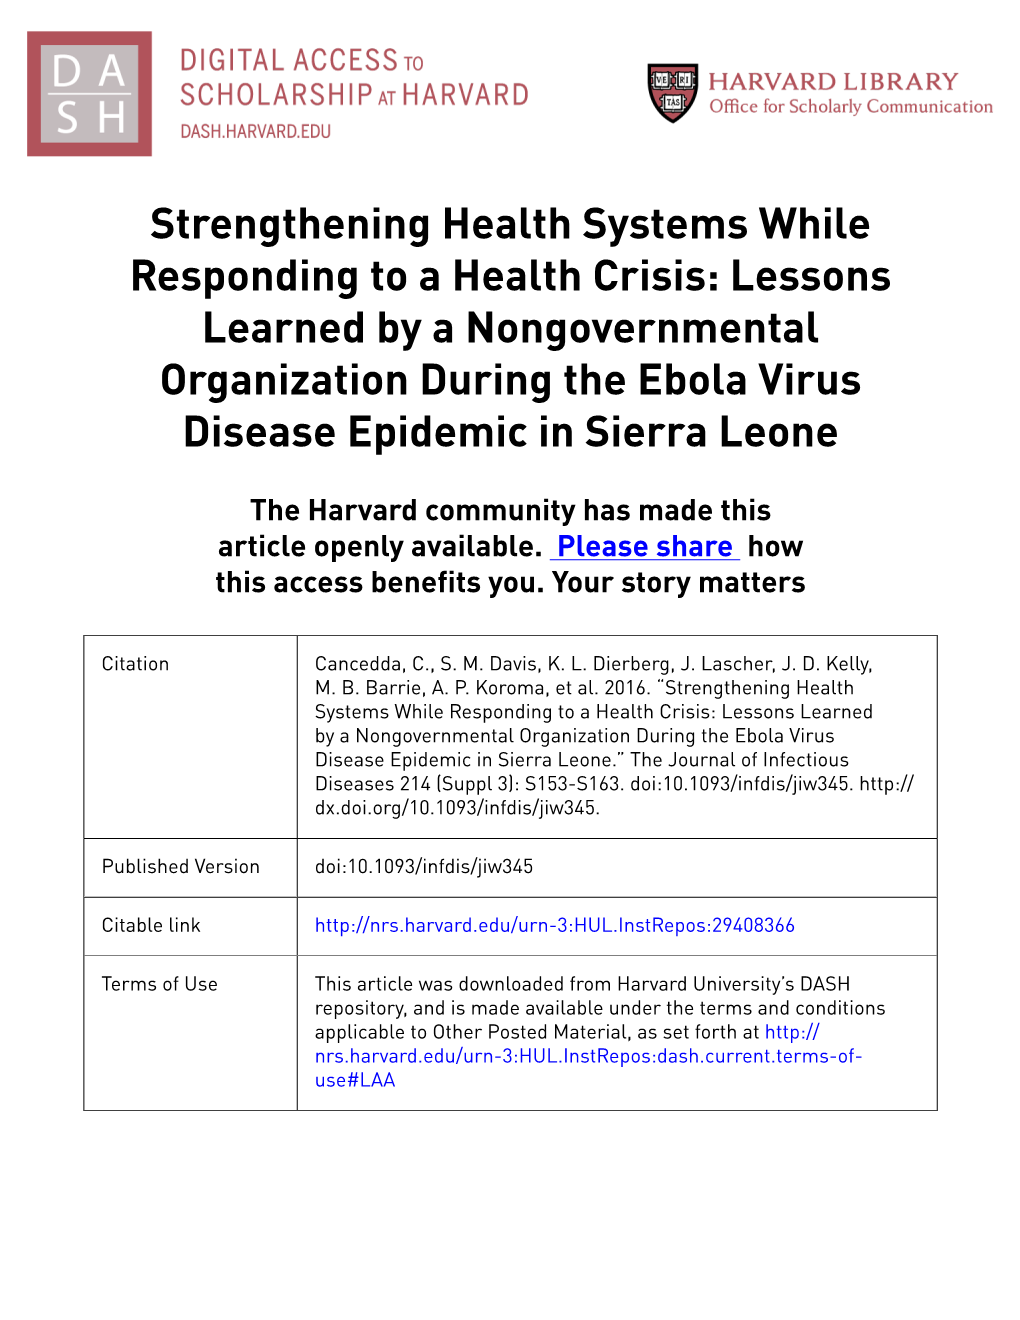 Strengthening Health Systems While Responding to a Health Crisis